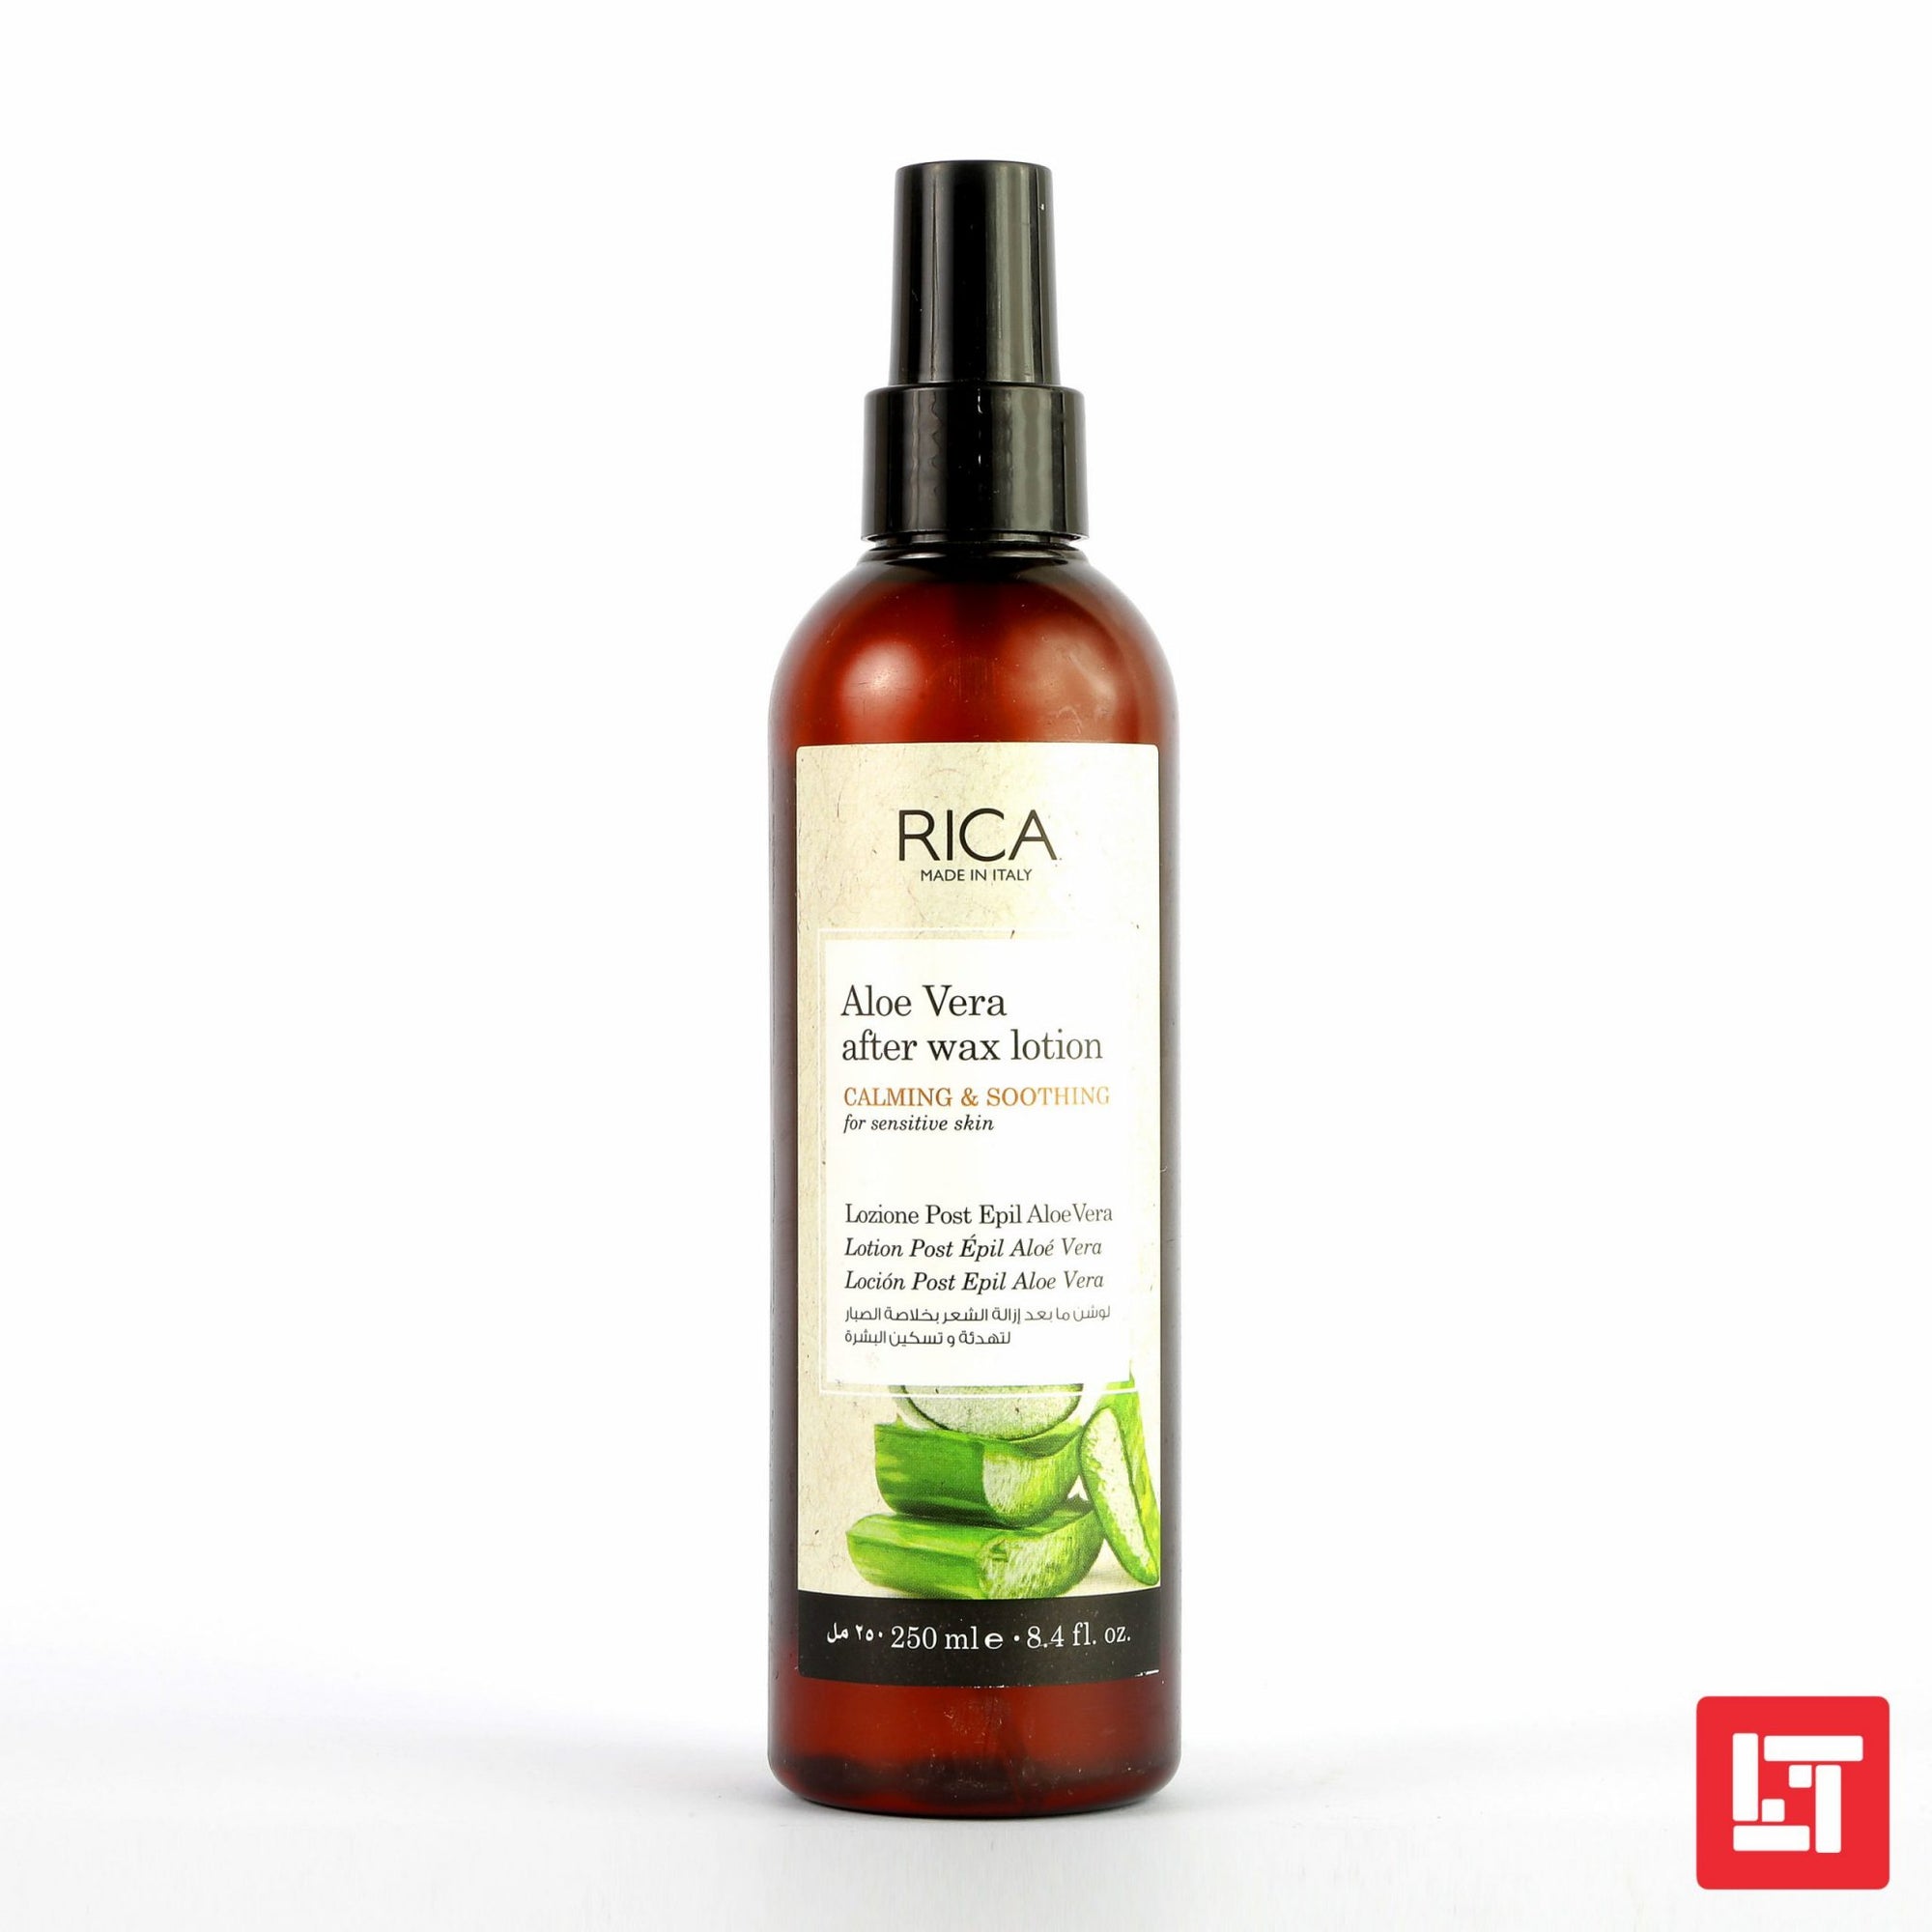 RICA Aloe Vera after Wax Lotion Calming & Soothing for Sensitive Skin 250ml freeshipping - lasertag.pk